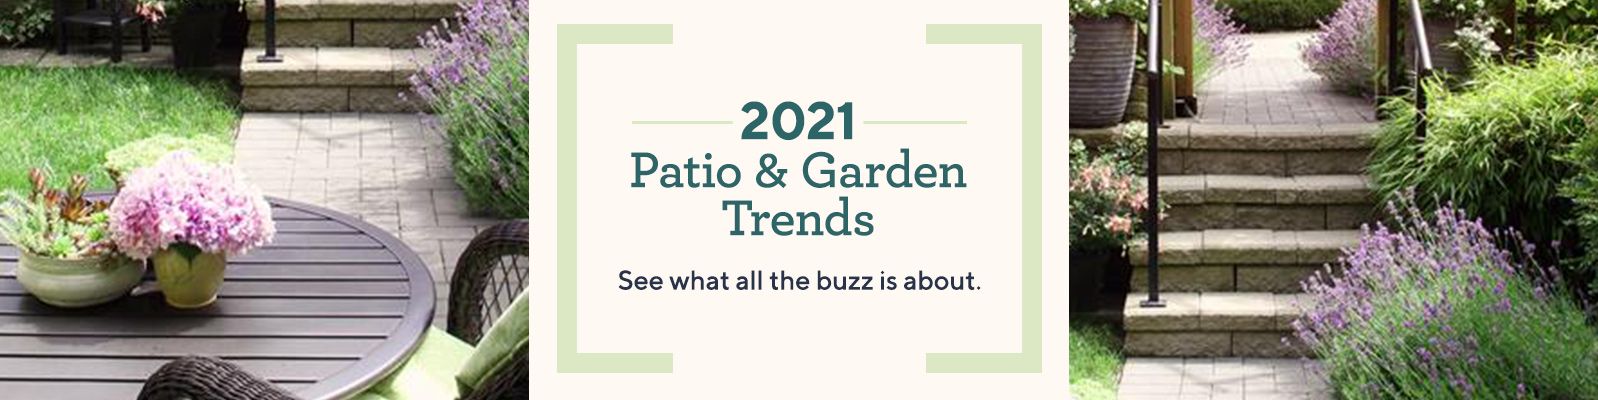 2021 Patio & Garden Trends. See what all the buzz is about.